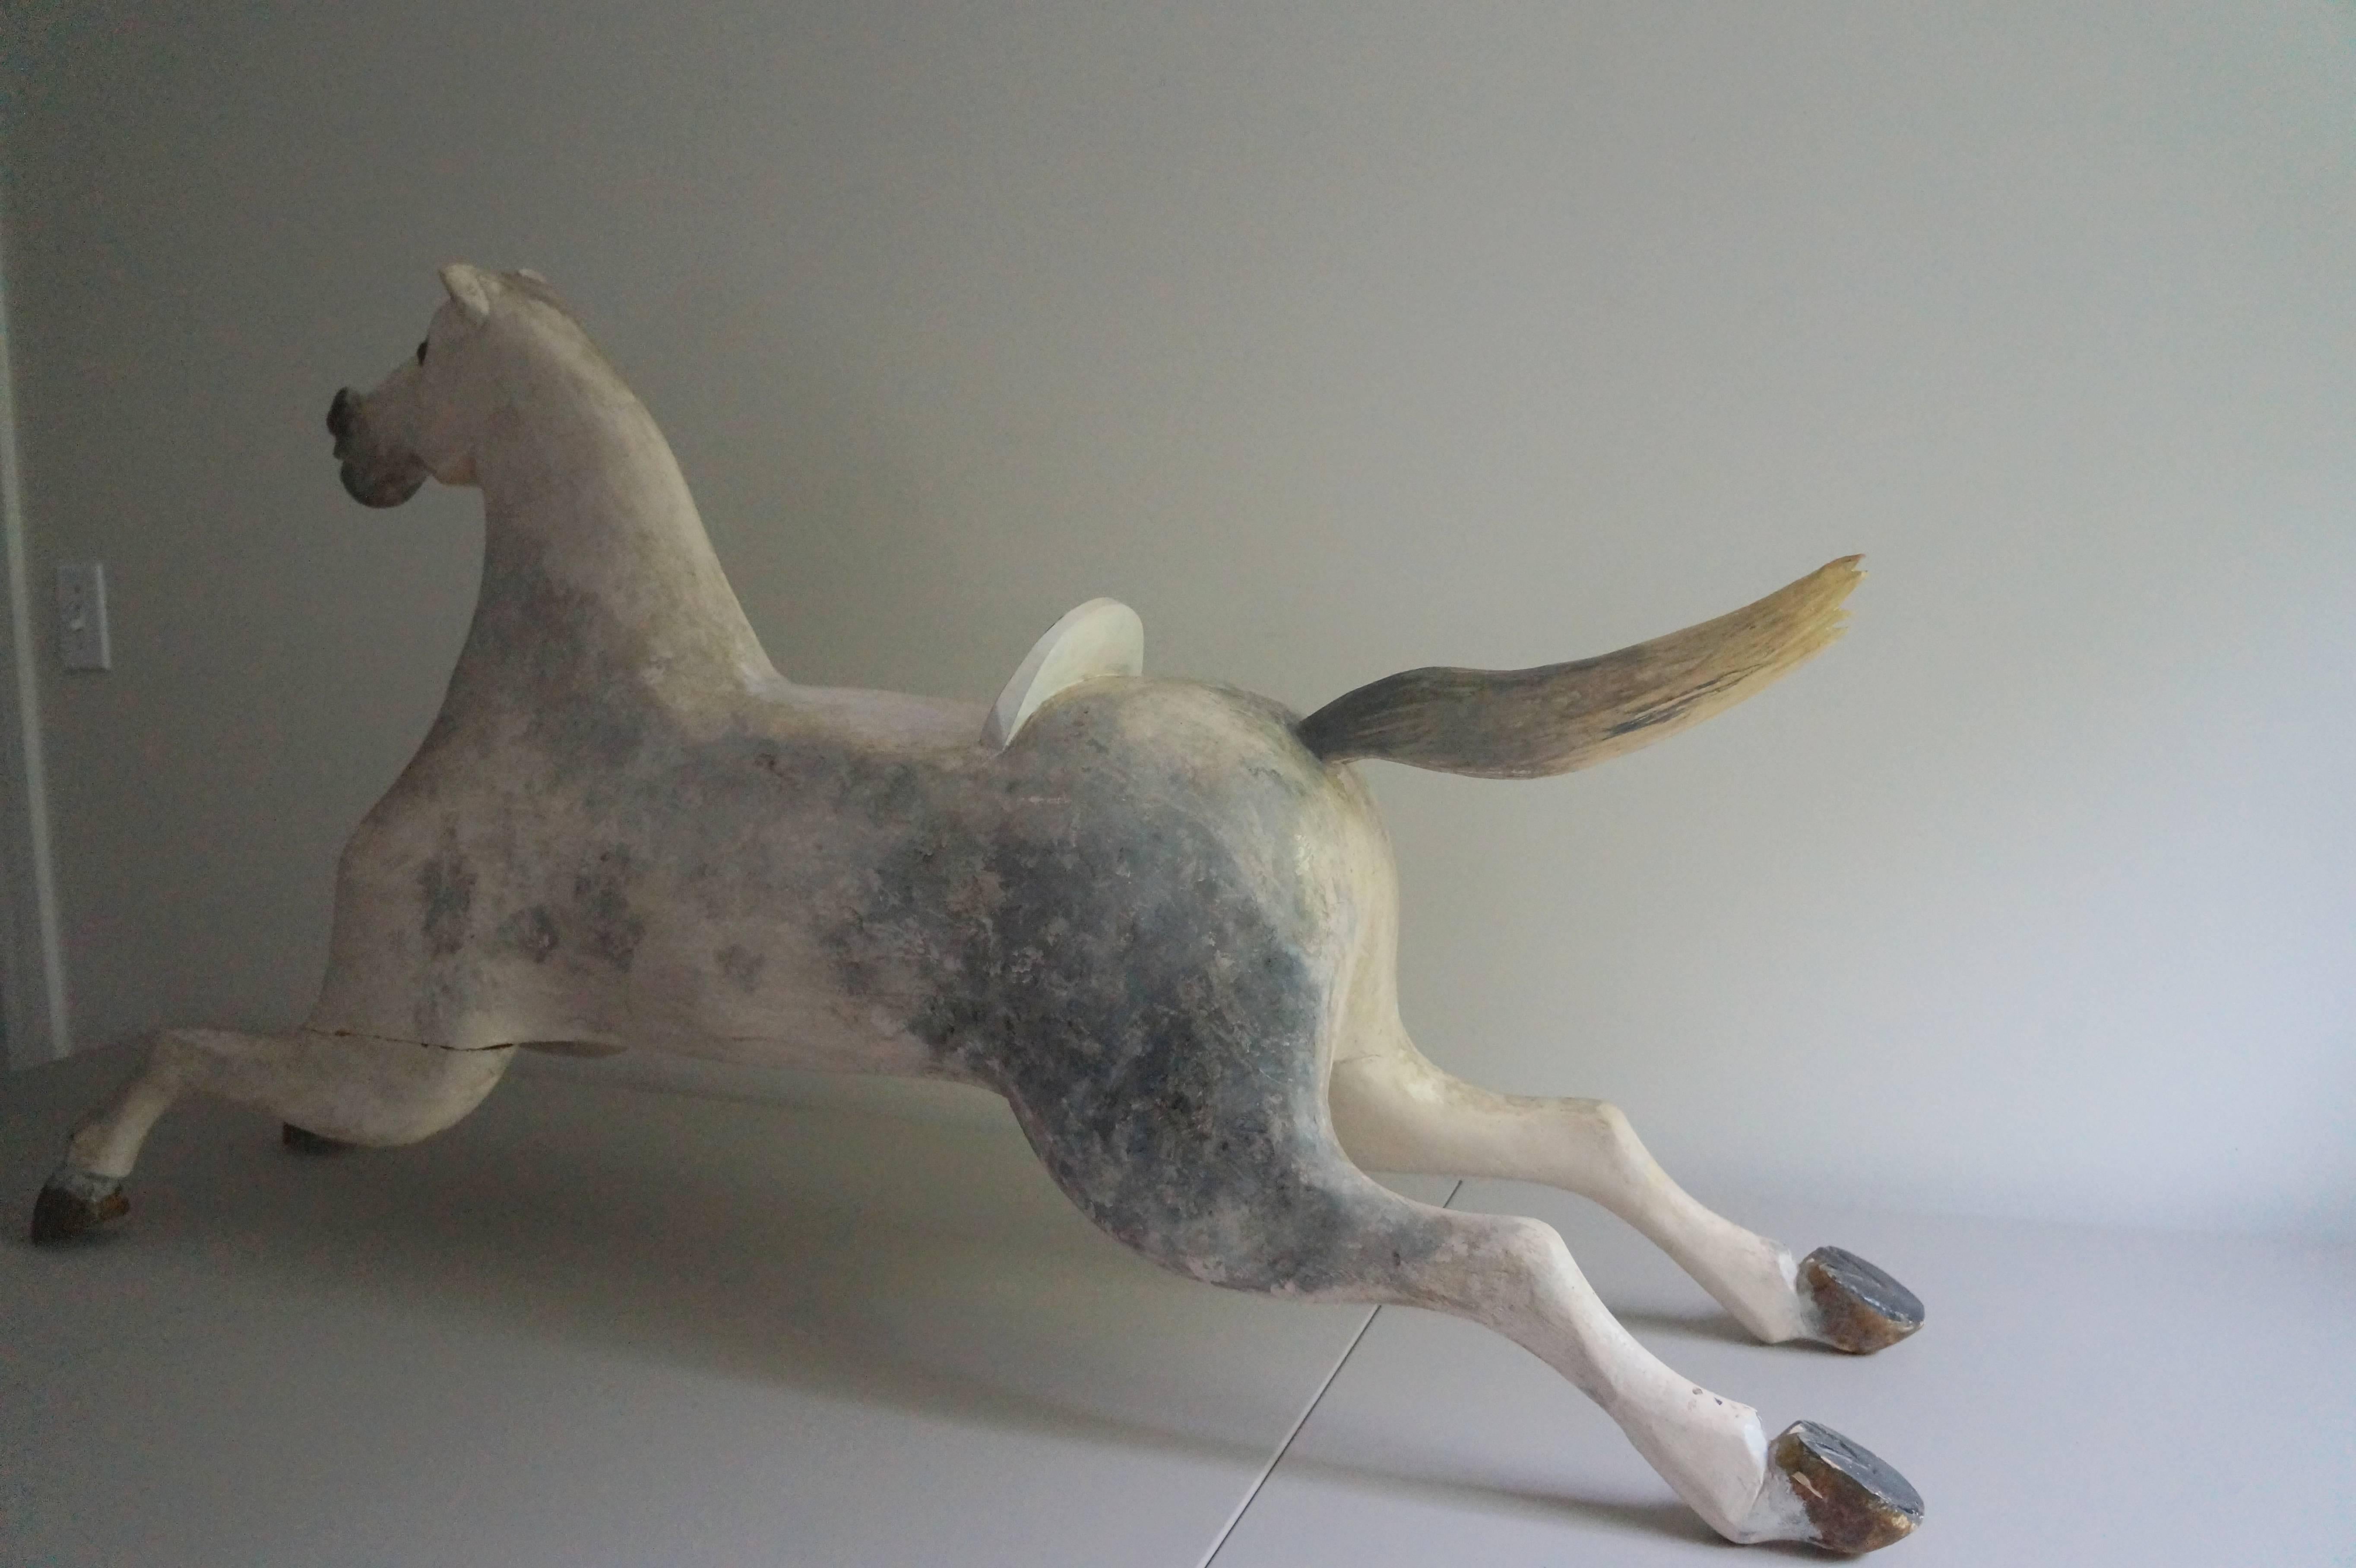 19th century wood horse, 50 inches long. Originally sat on a glider. Hand-carved with glass eyes. This one is a bit unusual as he has a wood tail. Not his original paint; however, the original paint may be underneath. Chips on tips of ears and a